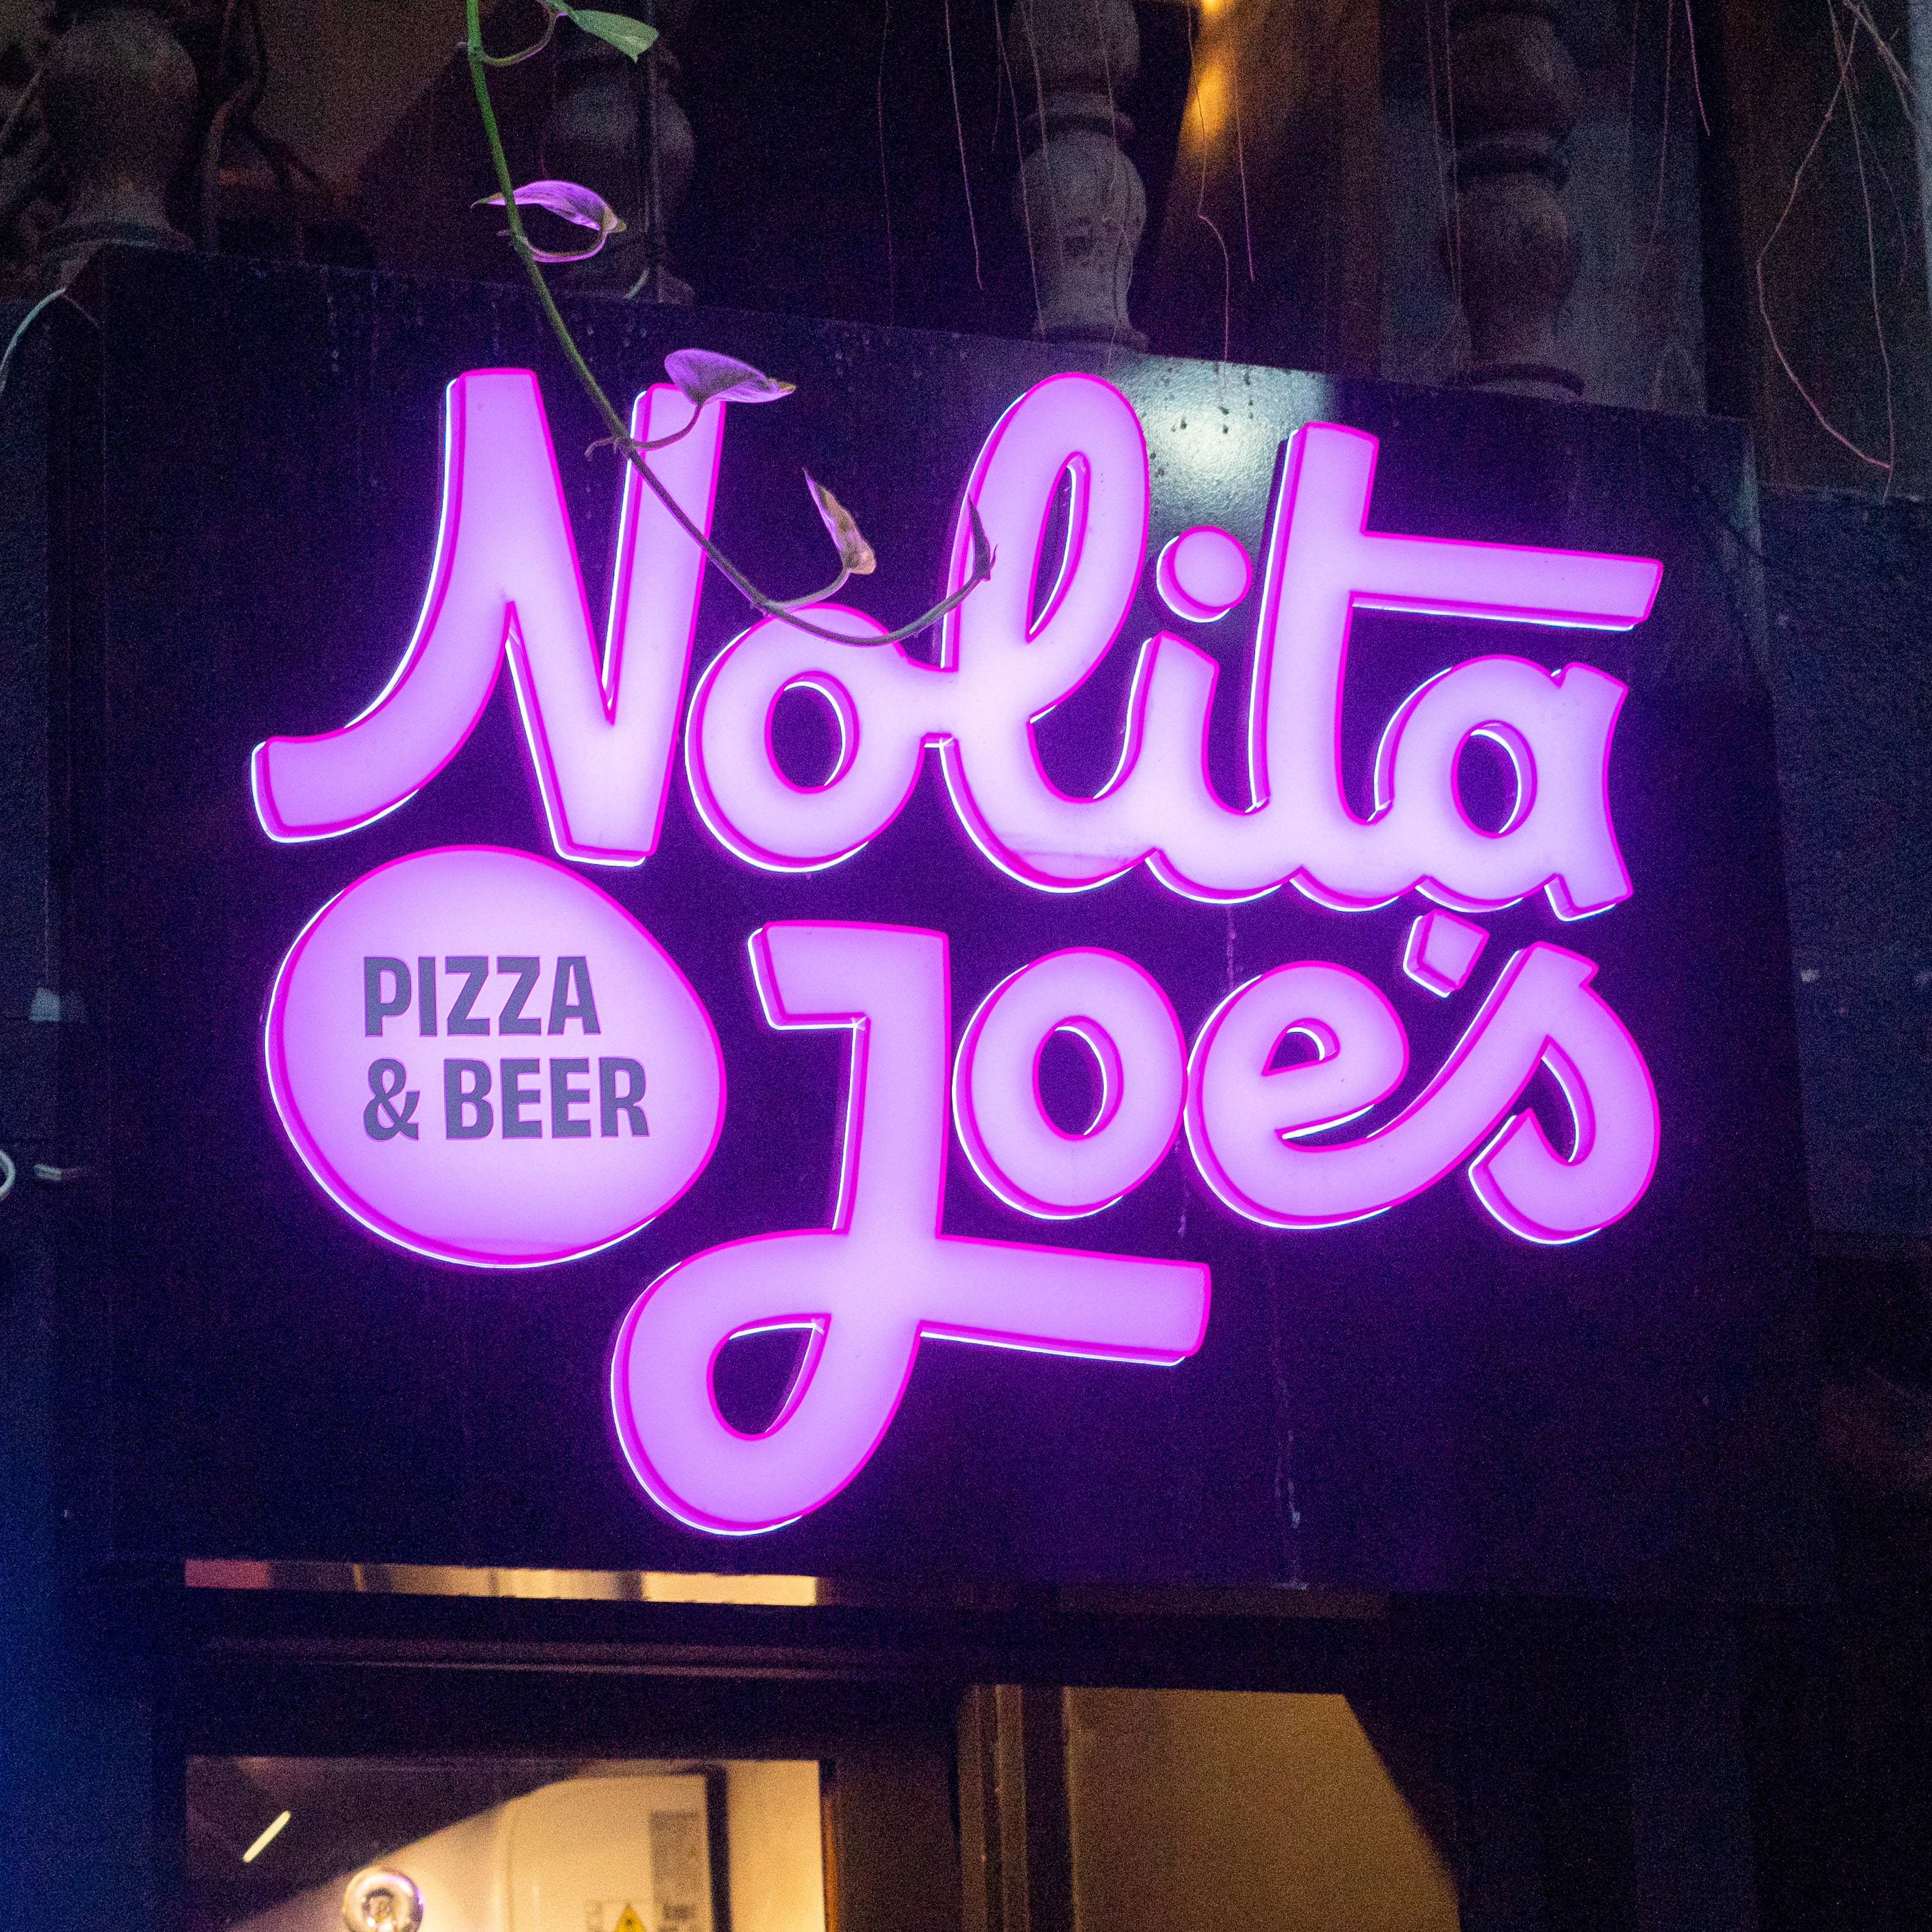 Pizza and Beer Find a New Home in Nolita Joe’s, Now Open in Poblacion!